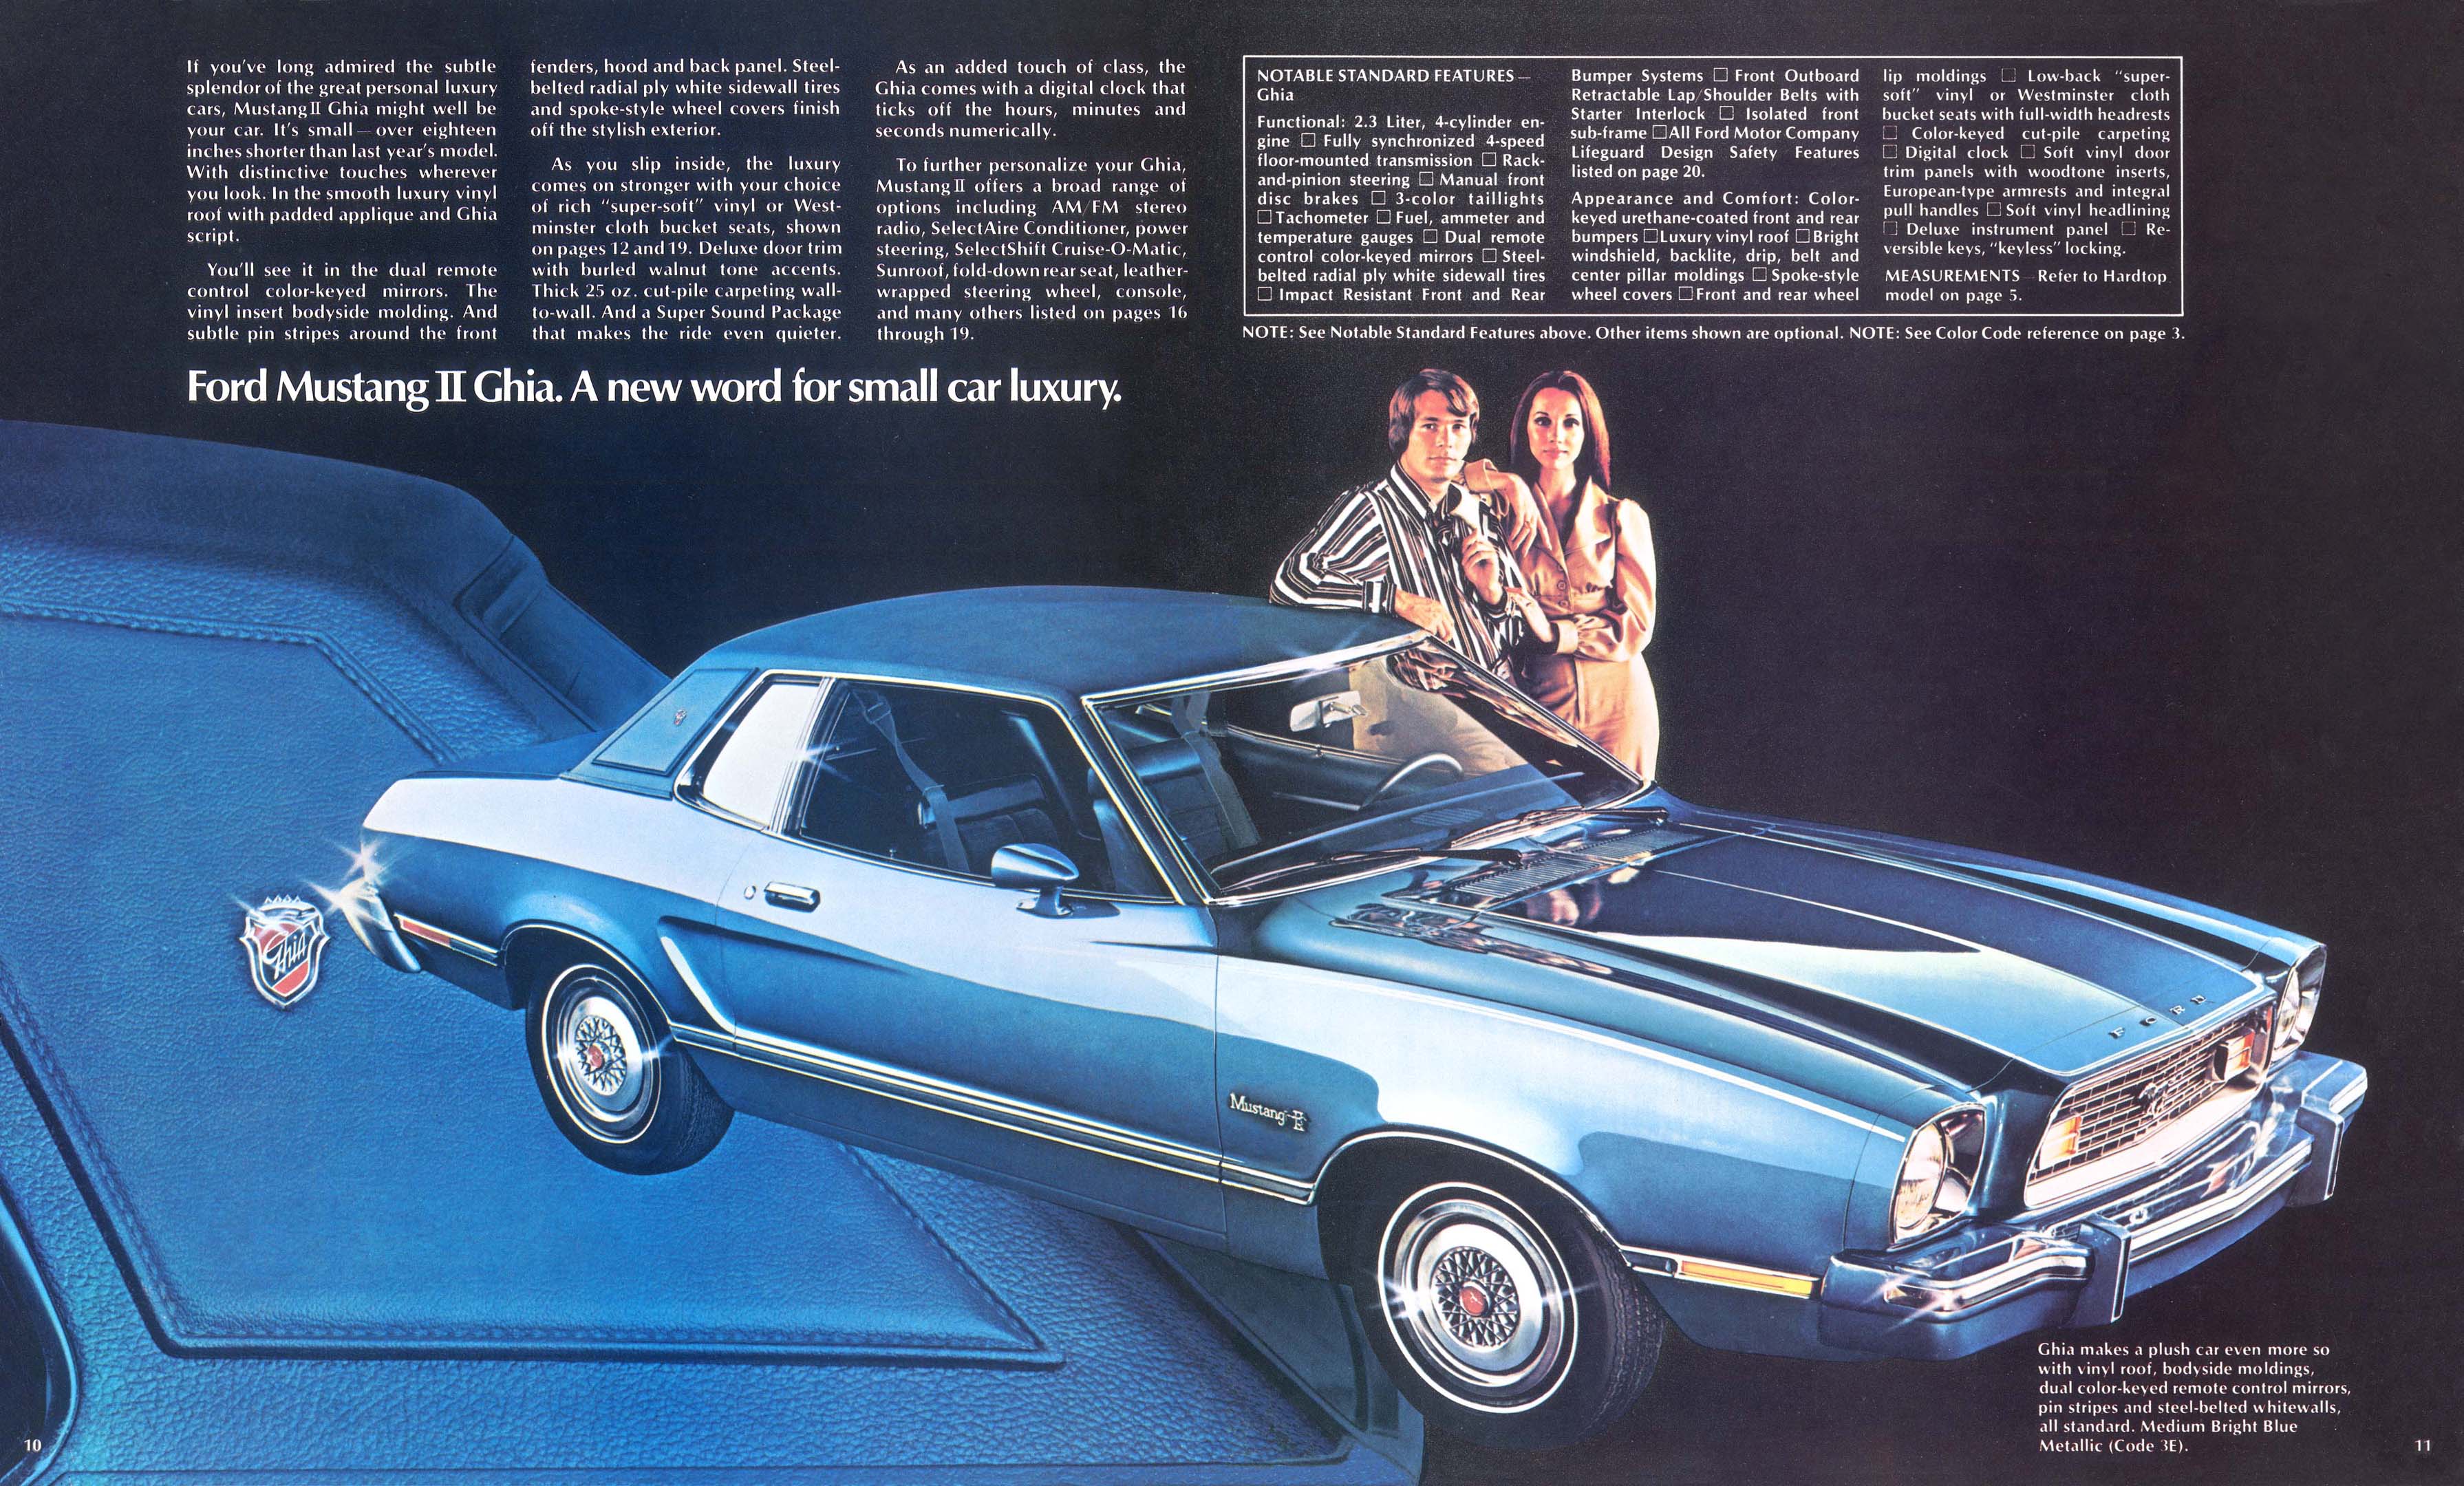 1974_Ford_Mustang_II-10-11